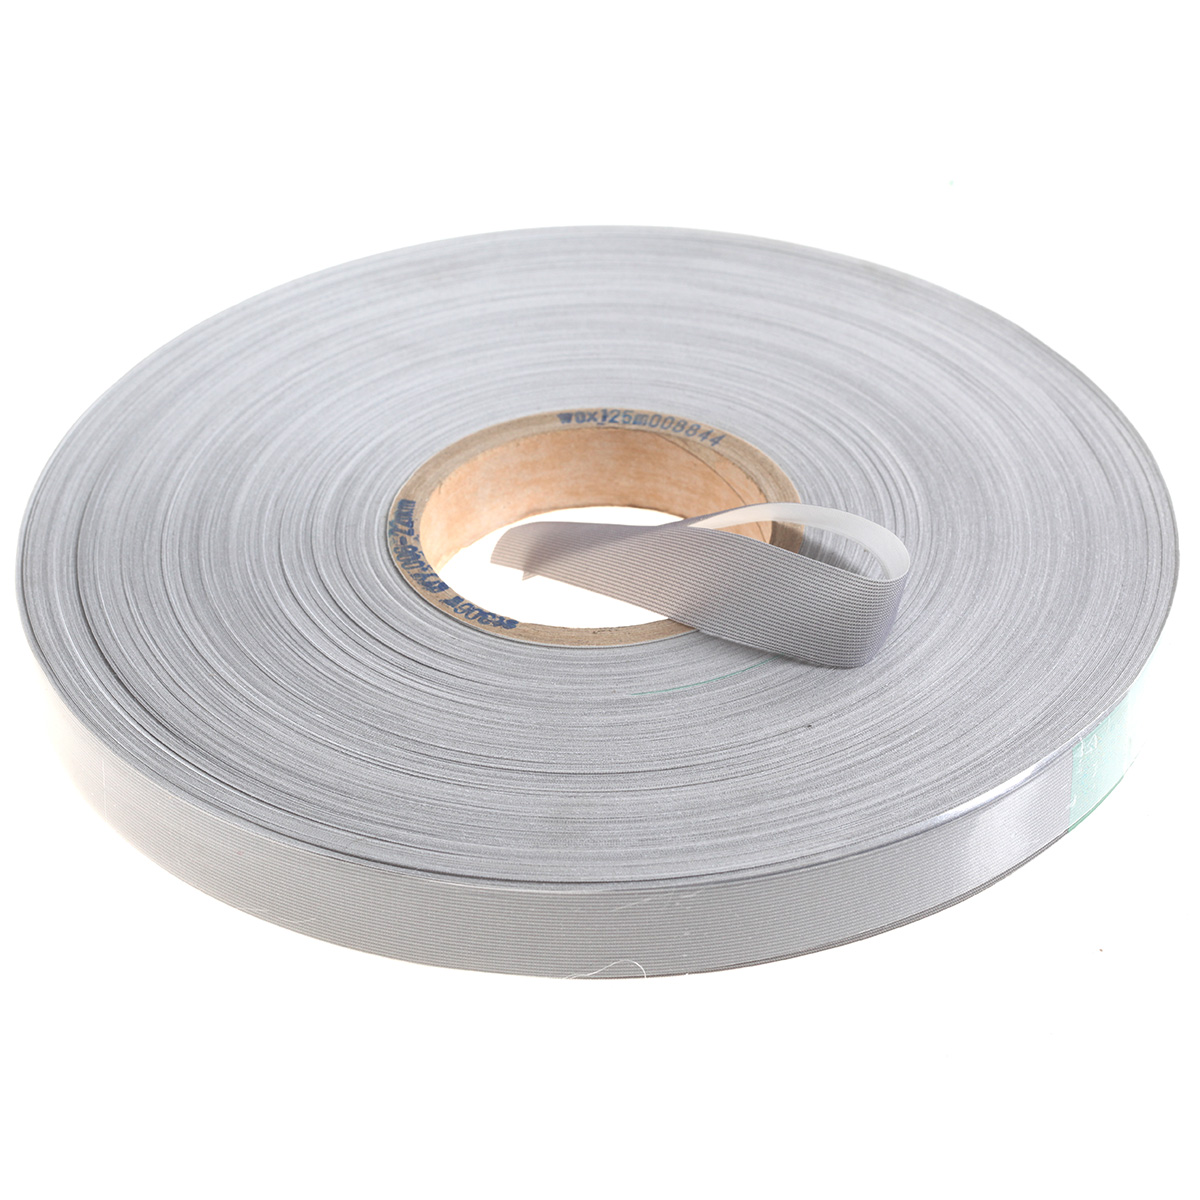 Waders and Jackets Repair Tape (1 m)